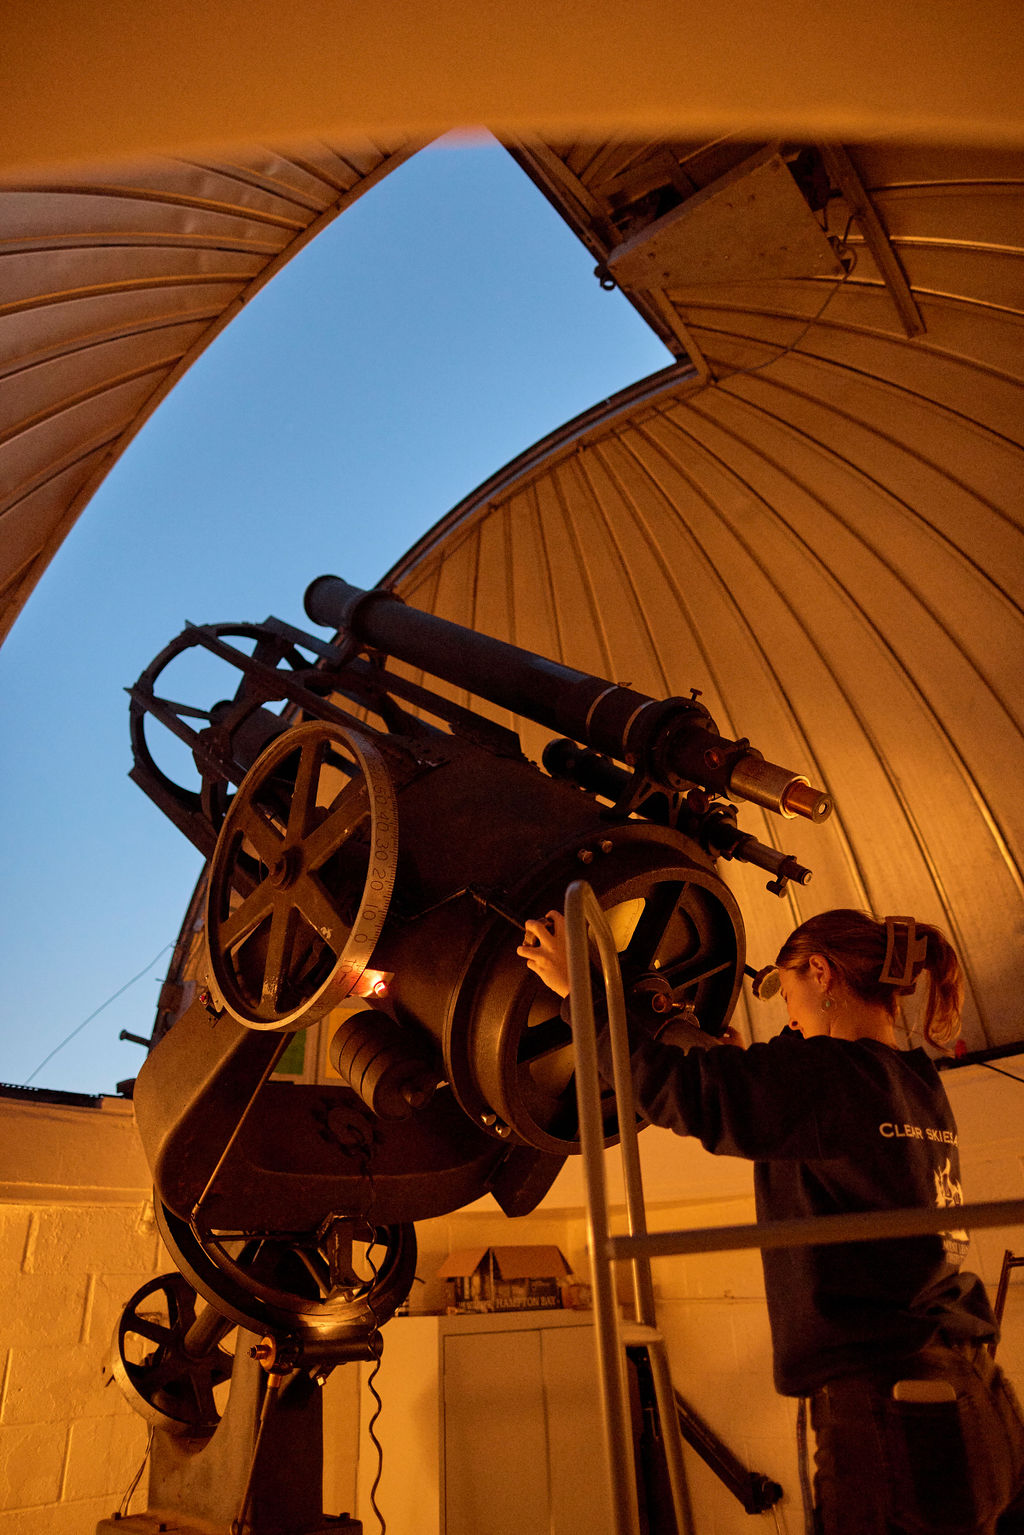 Image of a person using a telescope.